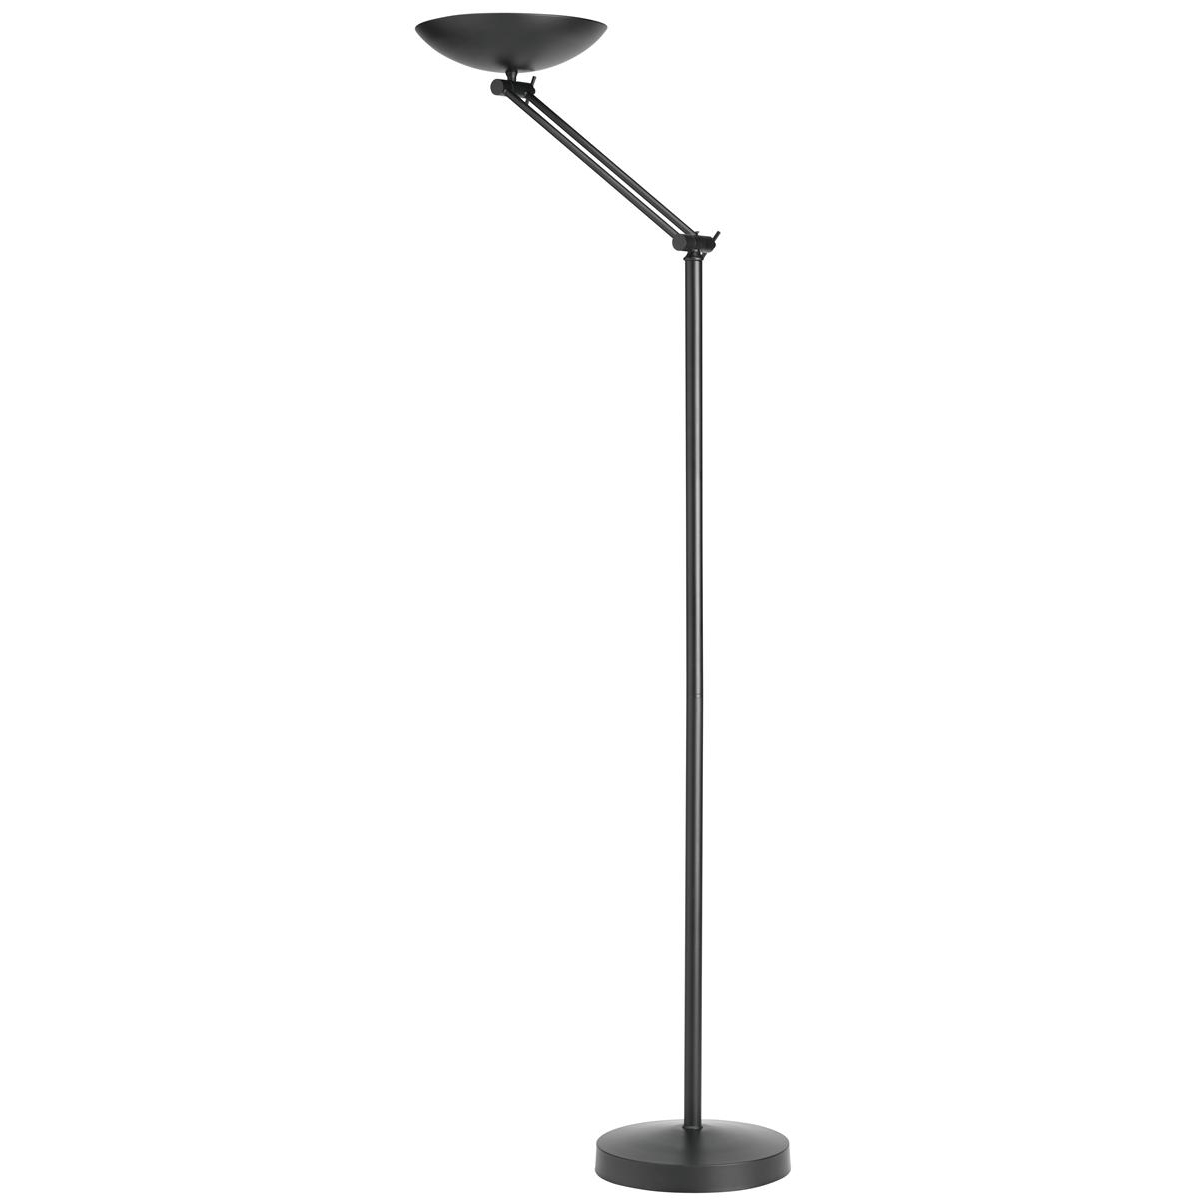 Unilux First Articulated Bowl Uplighter Floor Lamp 230w within sizing 1200 X 1200